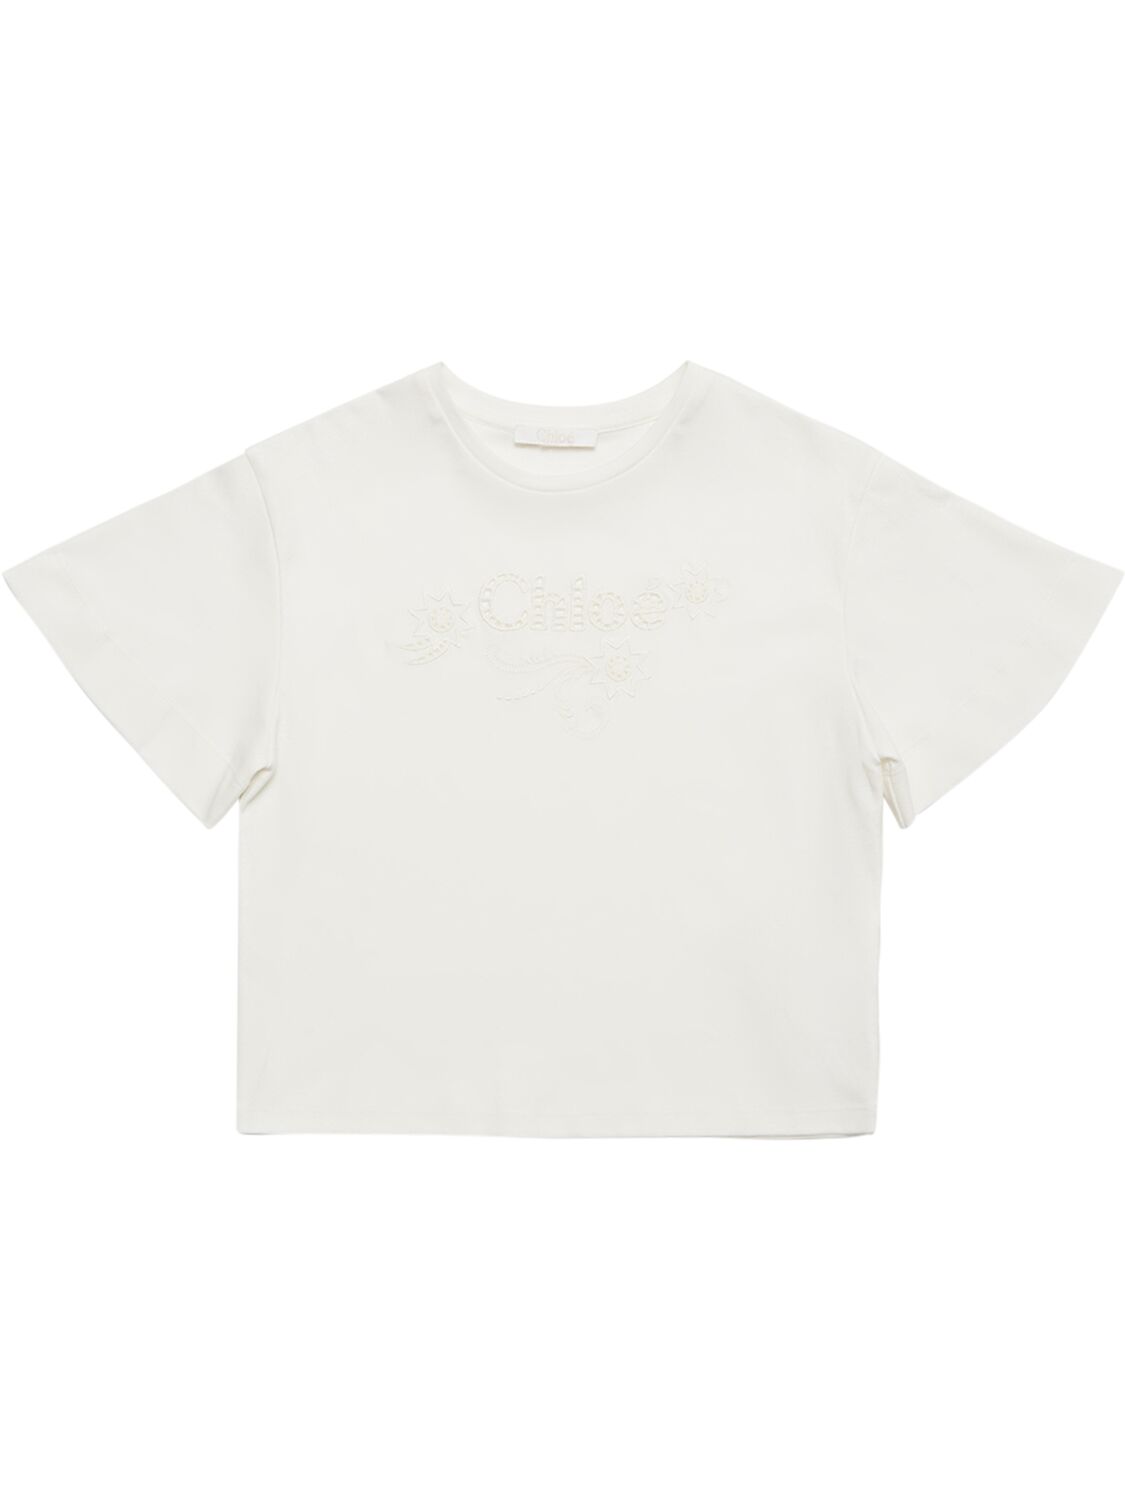 Chloé Teen Girls Ivory Cotton T-shirt In Off-white